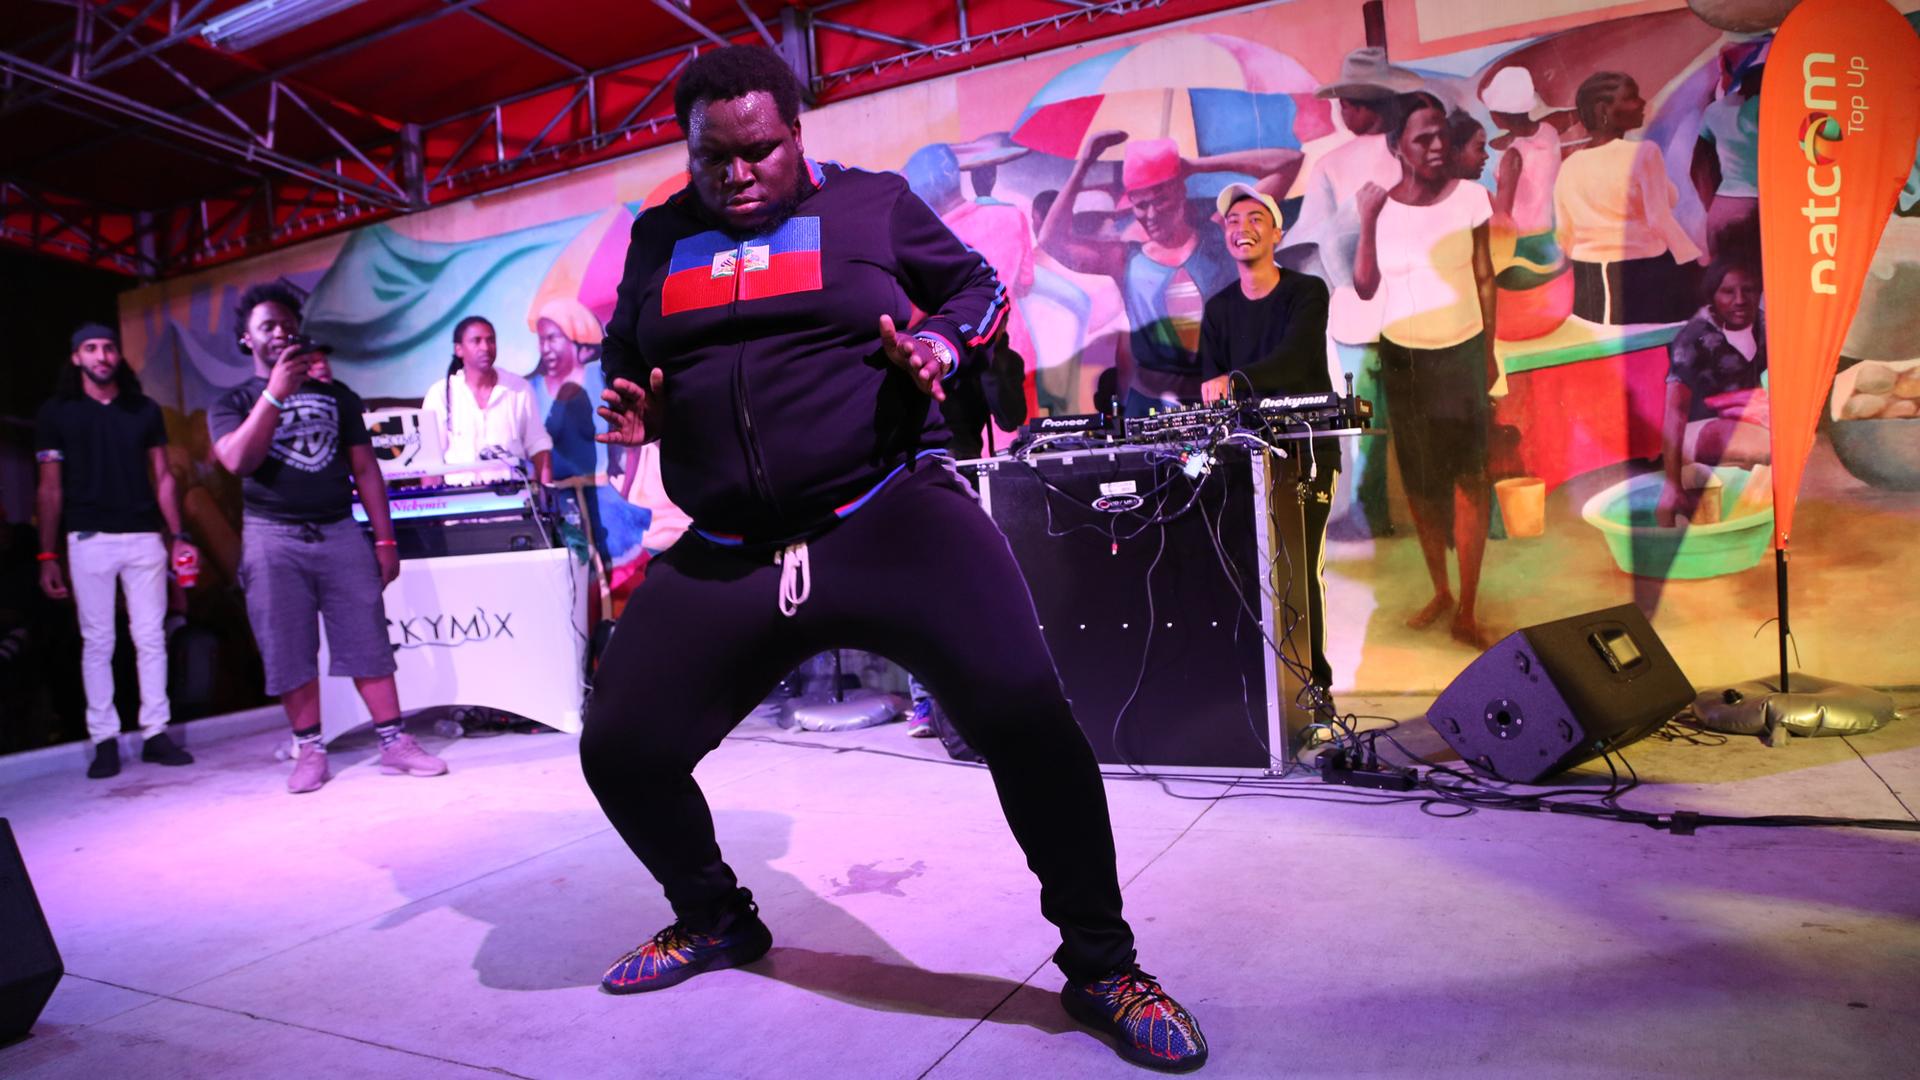 A fan dressed in a sweatshirt with the Haitian flag on it, joins DJ Michael Brun on stage at the Bayo Block Party in Miami, Flordia.